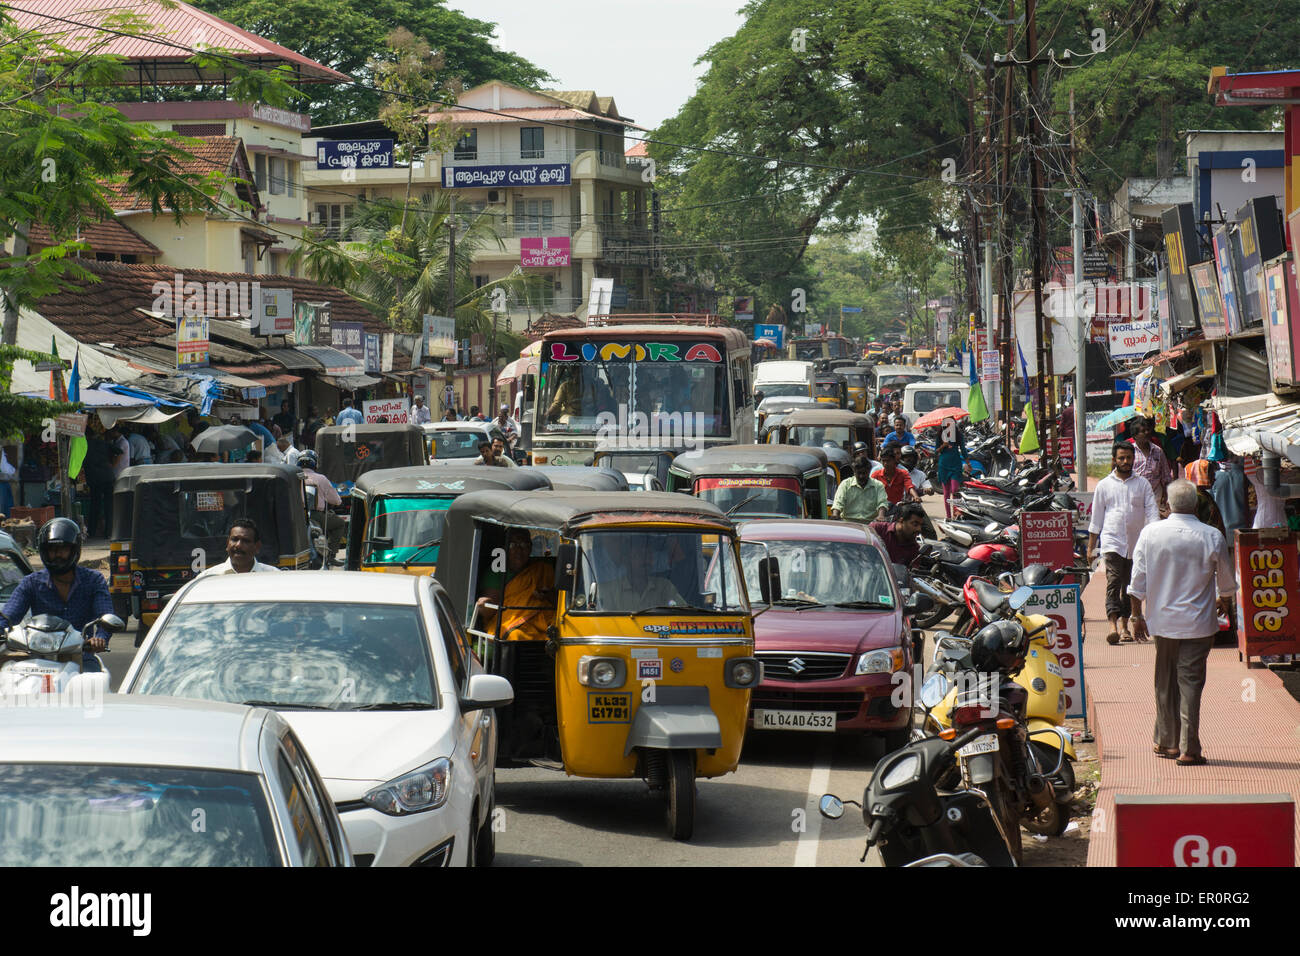 India, Kerala, port city of Cochin. Typical overcrowded streets of Cochin. Stock Photo